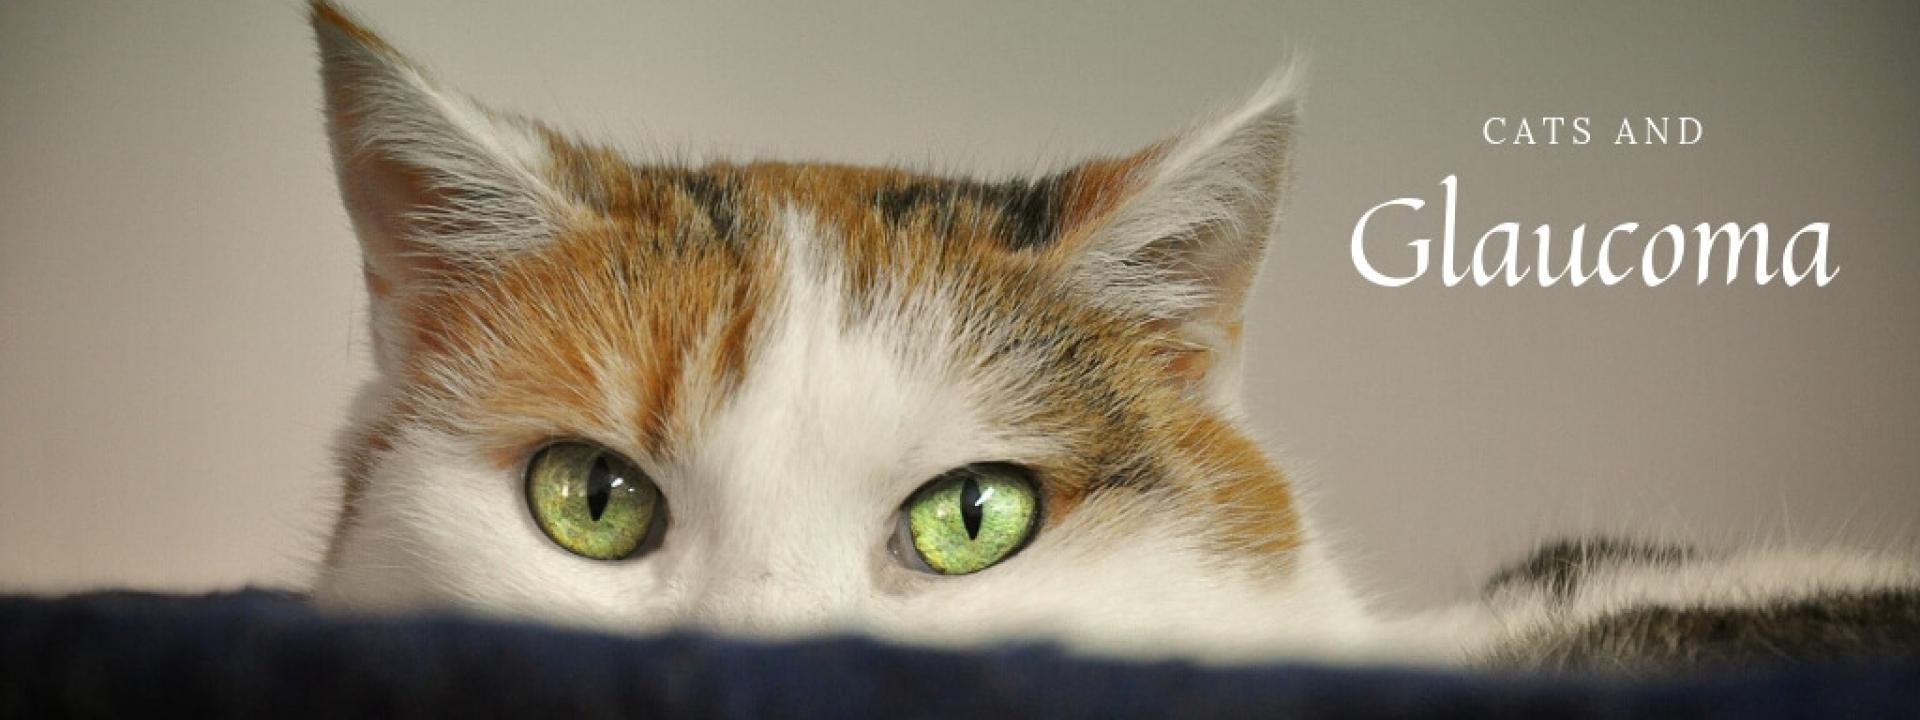 Photograph of cat, focusing on eyes